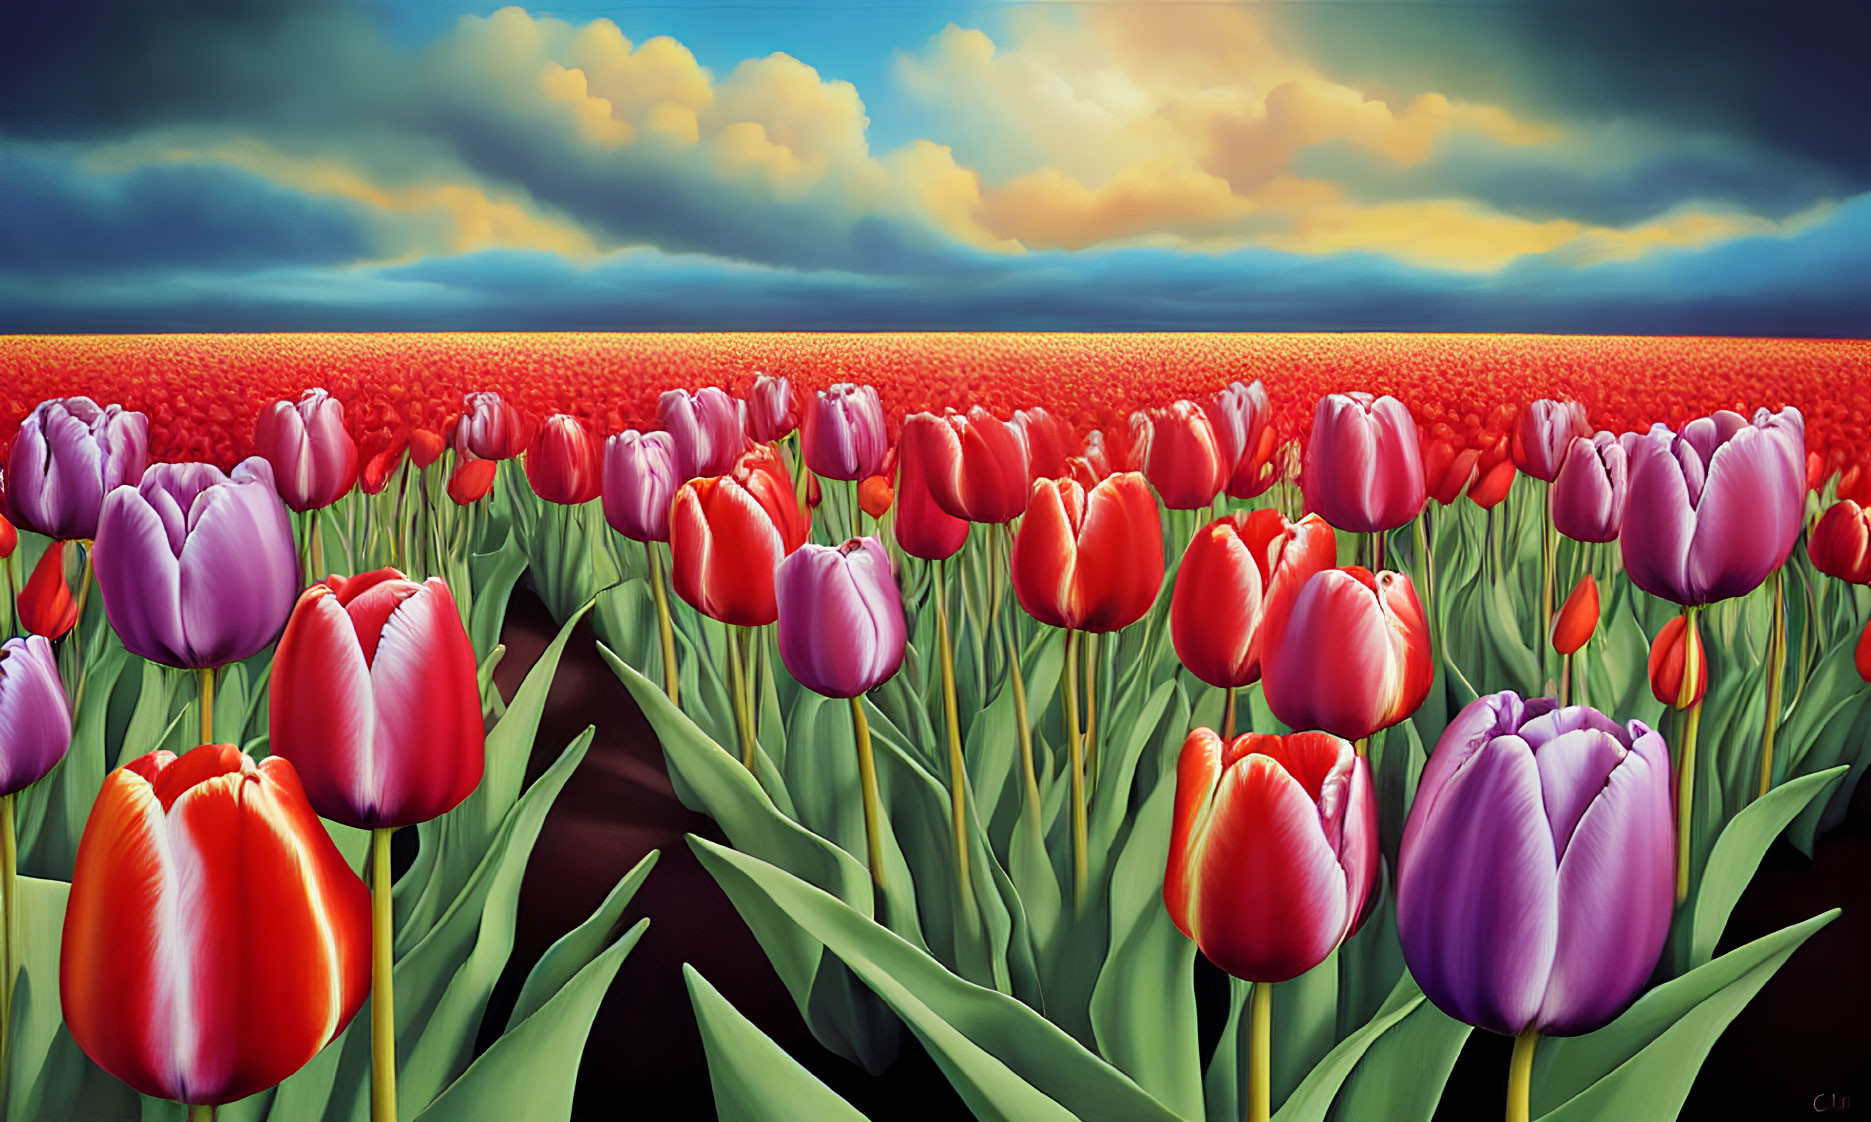 Colorful Field of Red and Purple Tulips under Dramatic Sky